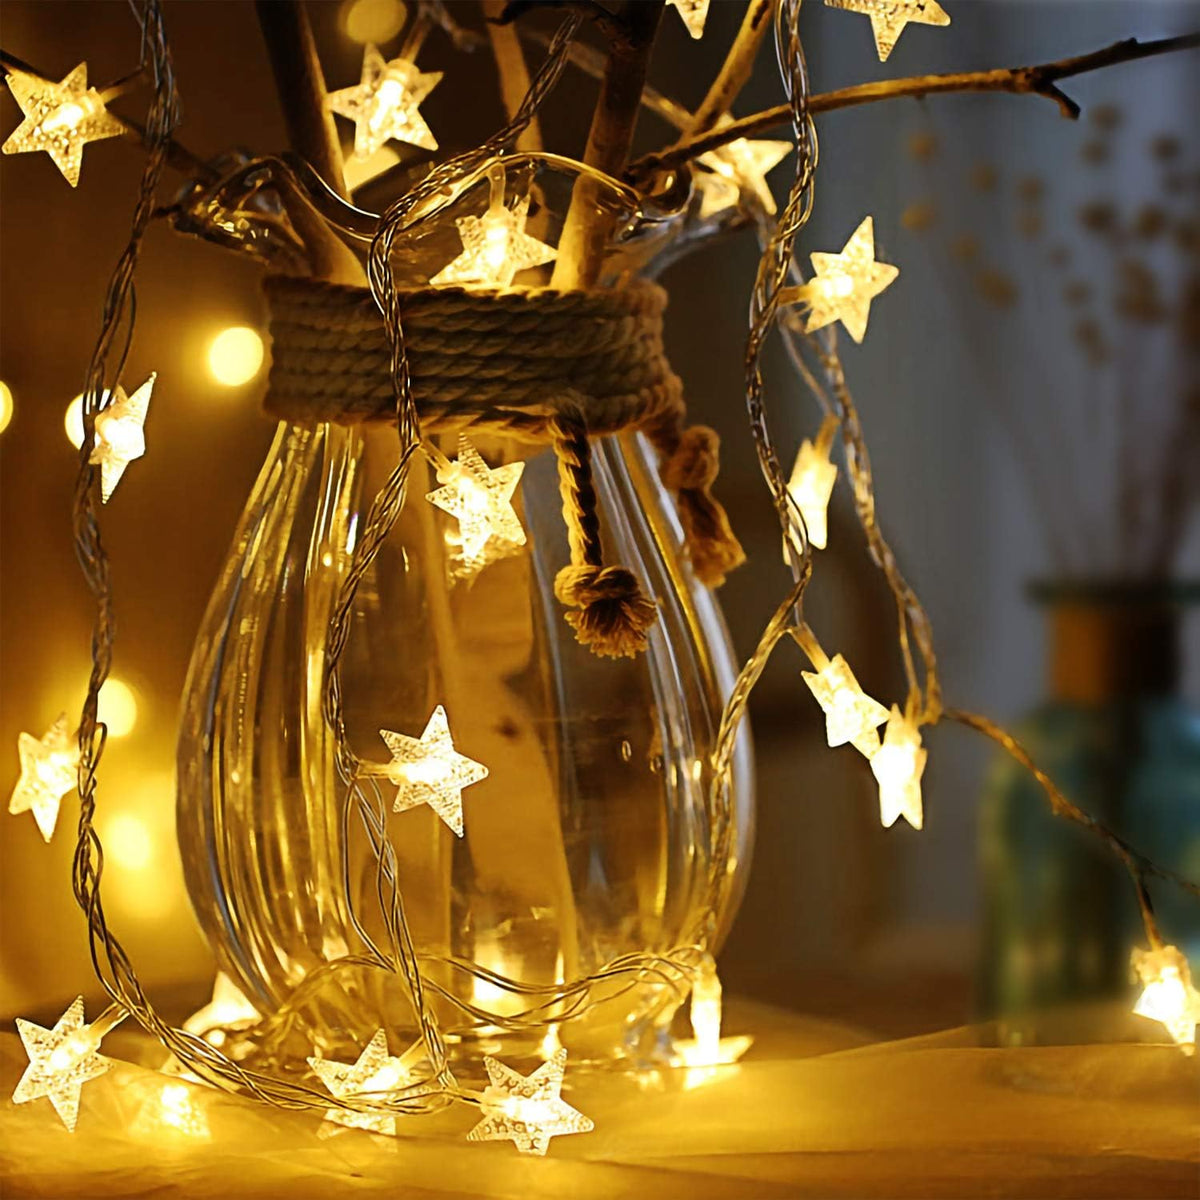 Star Fairy Lights, 6M 40Pcs LED Battery Powered String Lights, Two Mode Monochrom and Shining Decoration Lightning